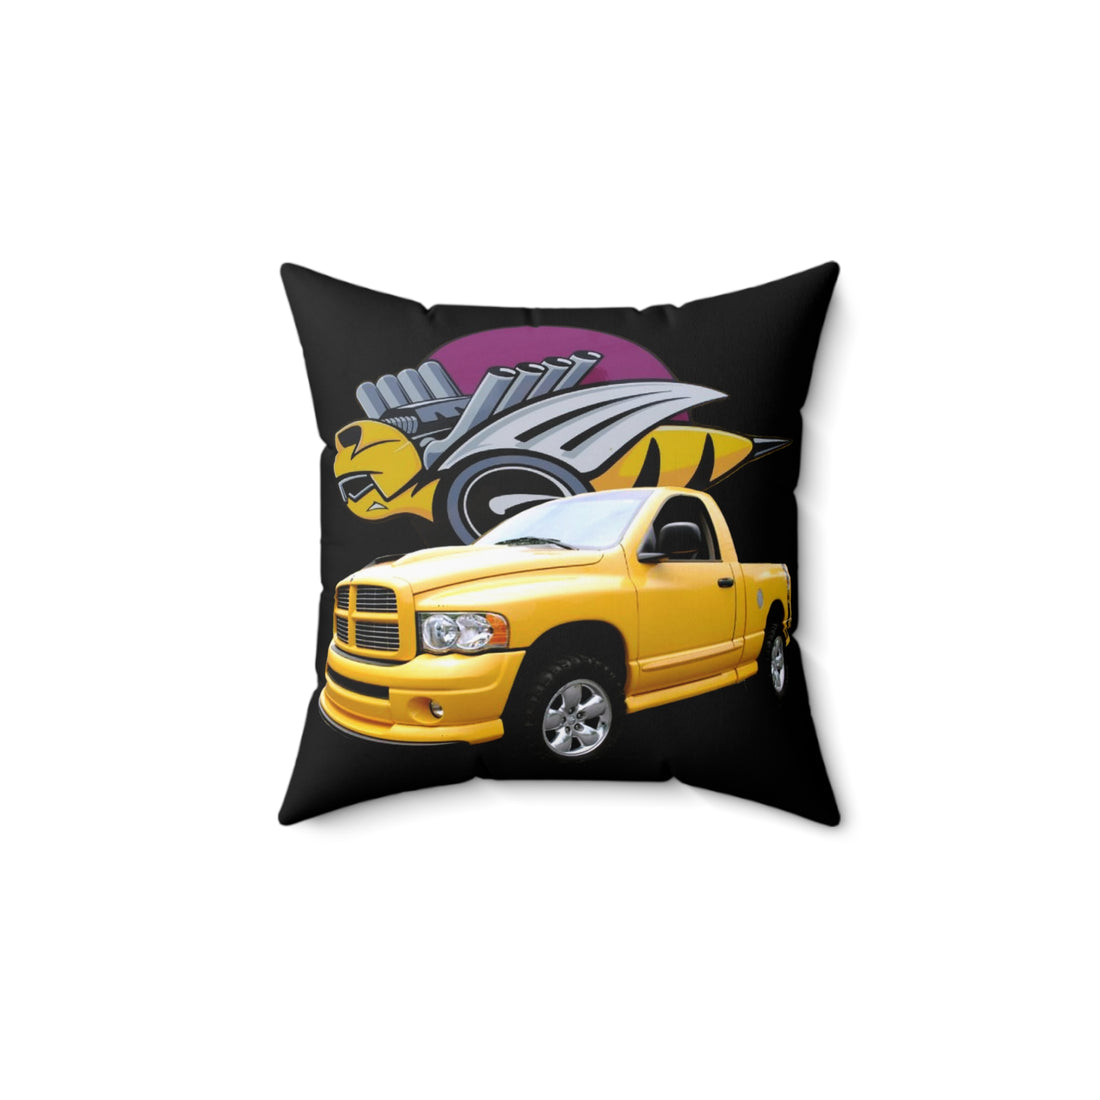 2005 Rumble Bee Spun Polyester Square Pillow